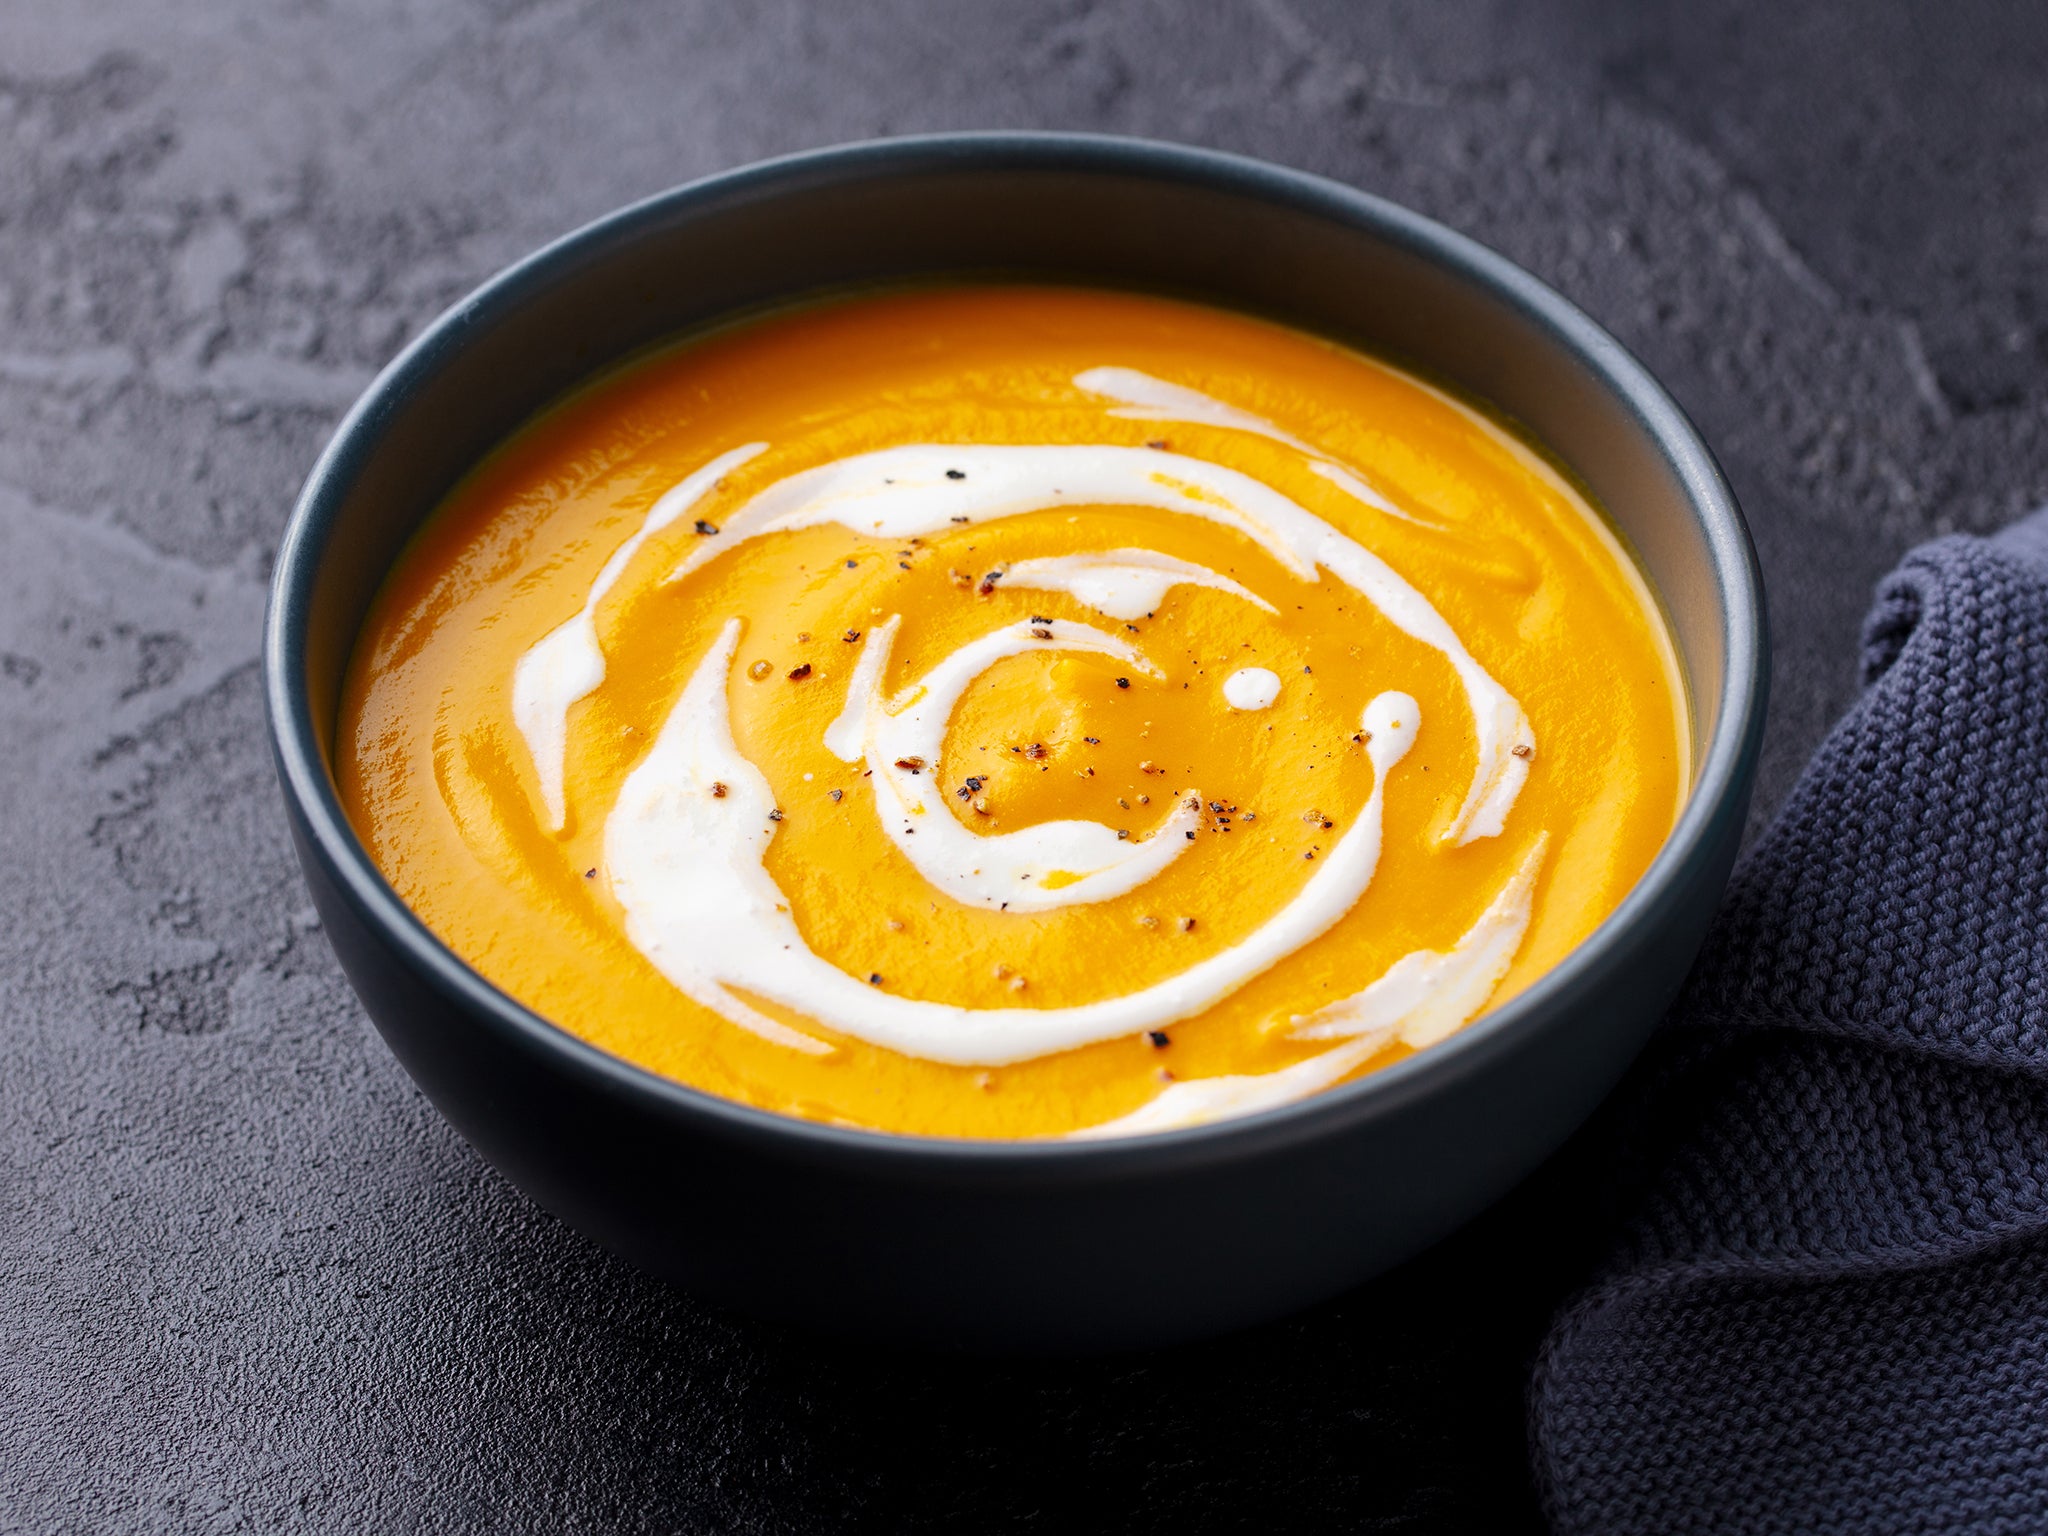 Spicy peanut and pumpkin soup: a promise of warmth on those cool autumn nights